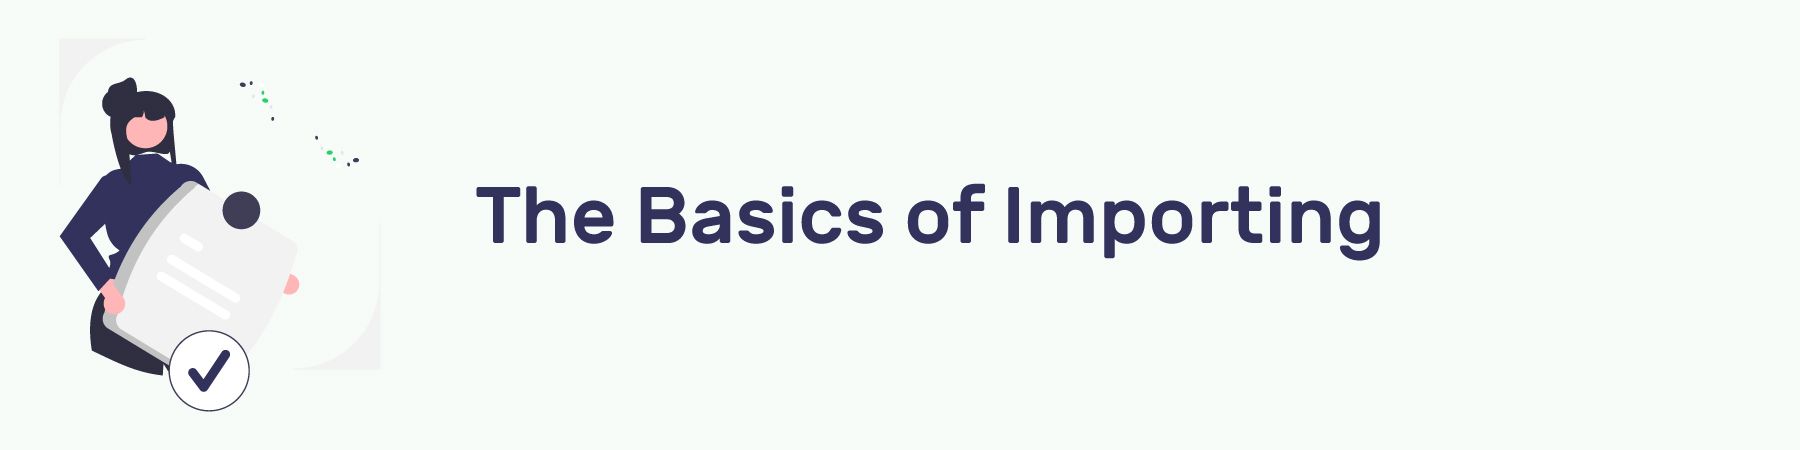 The Basics of Importing Section Header